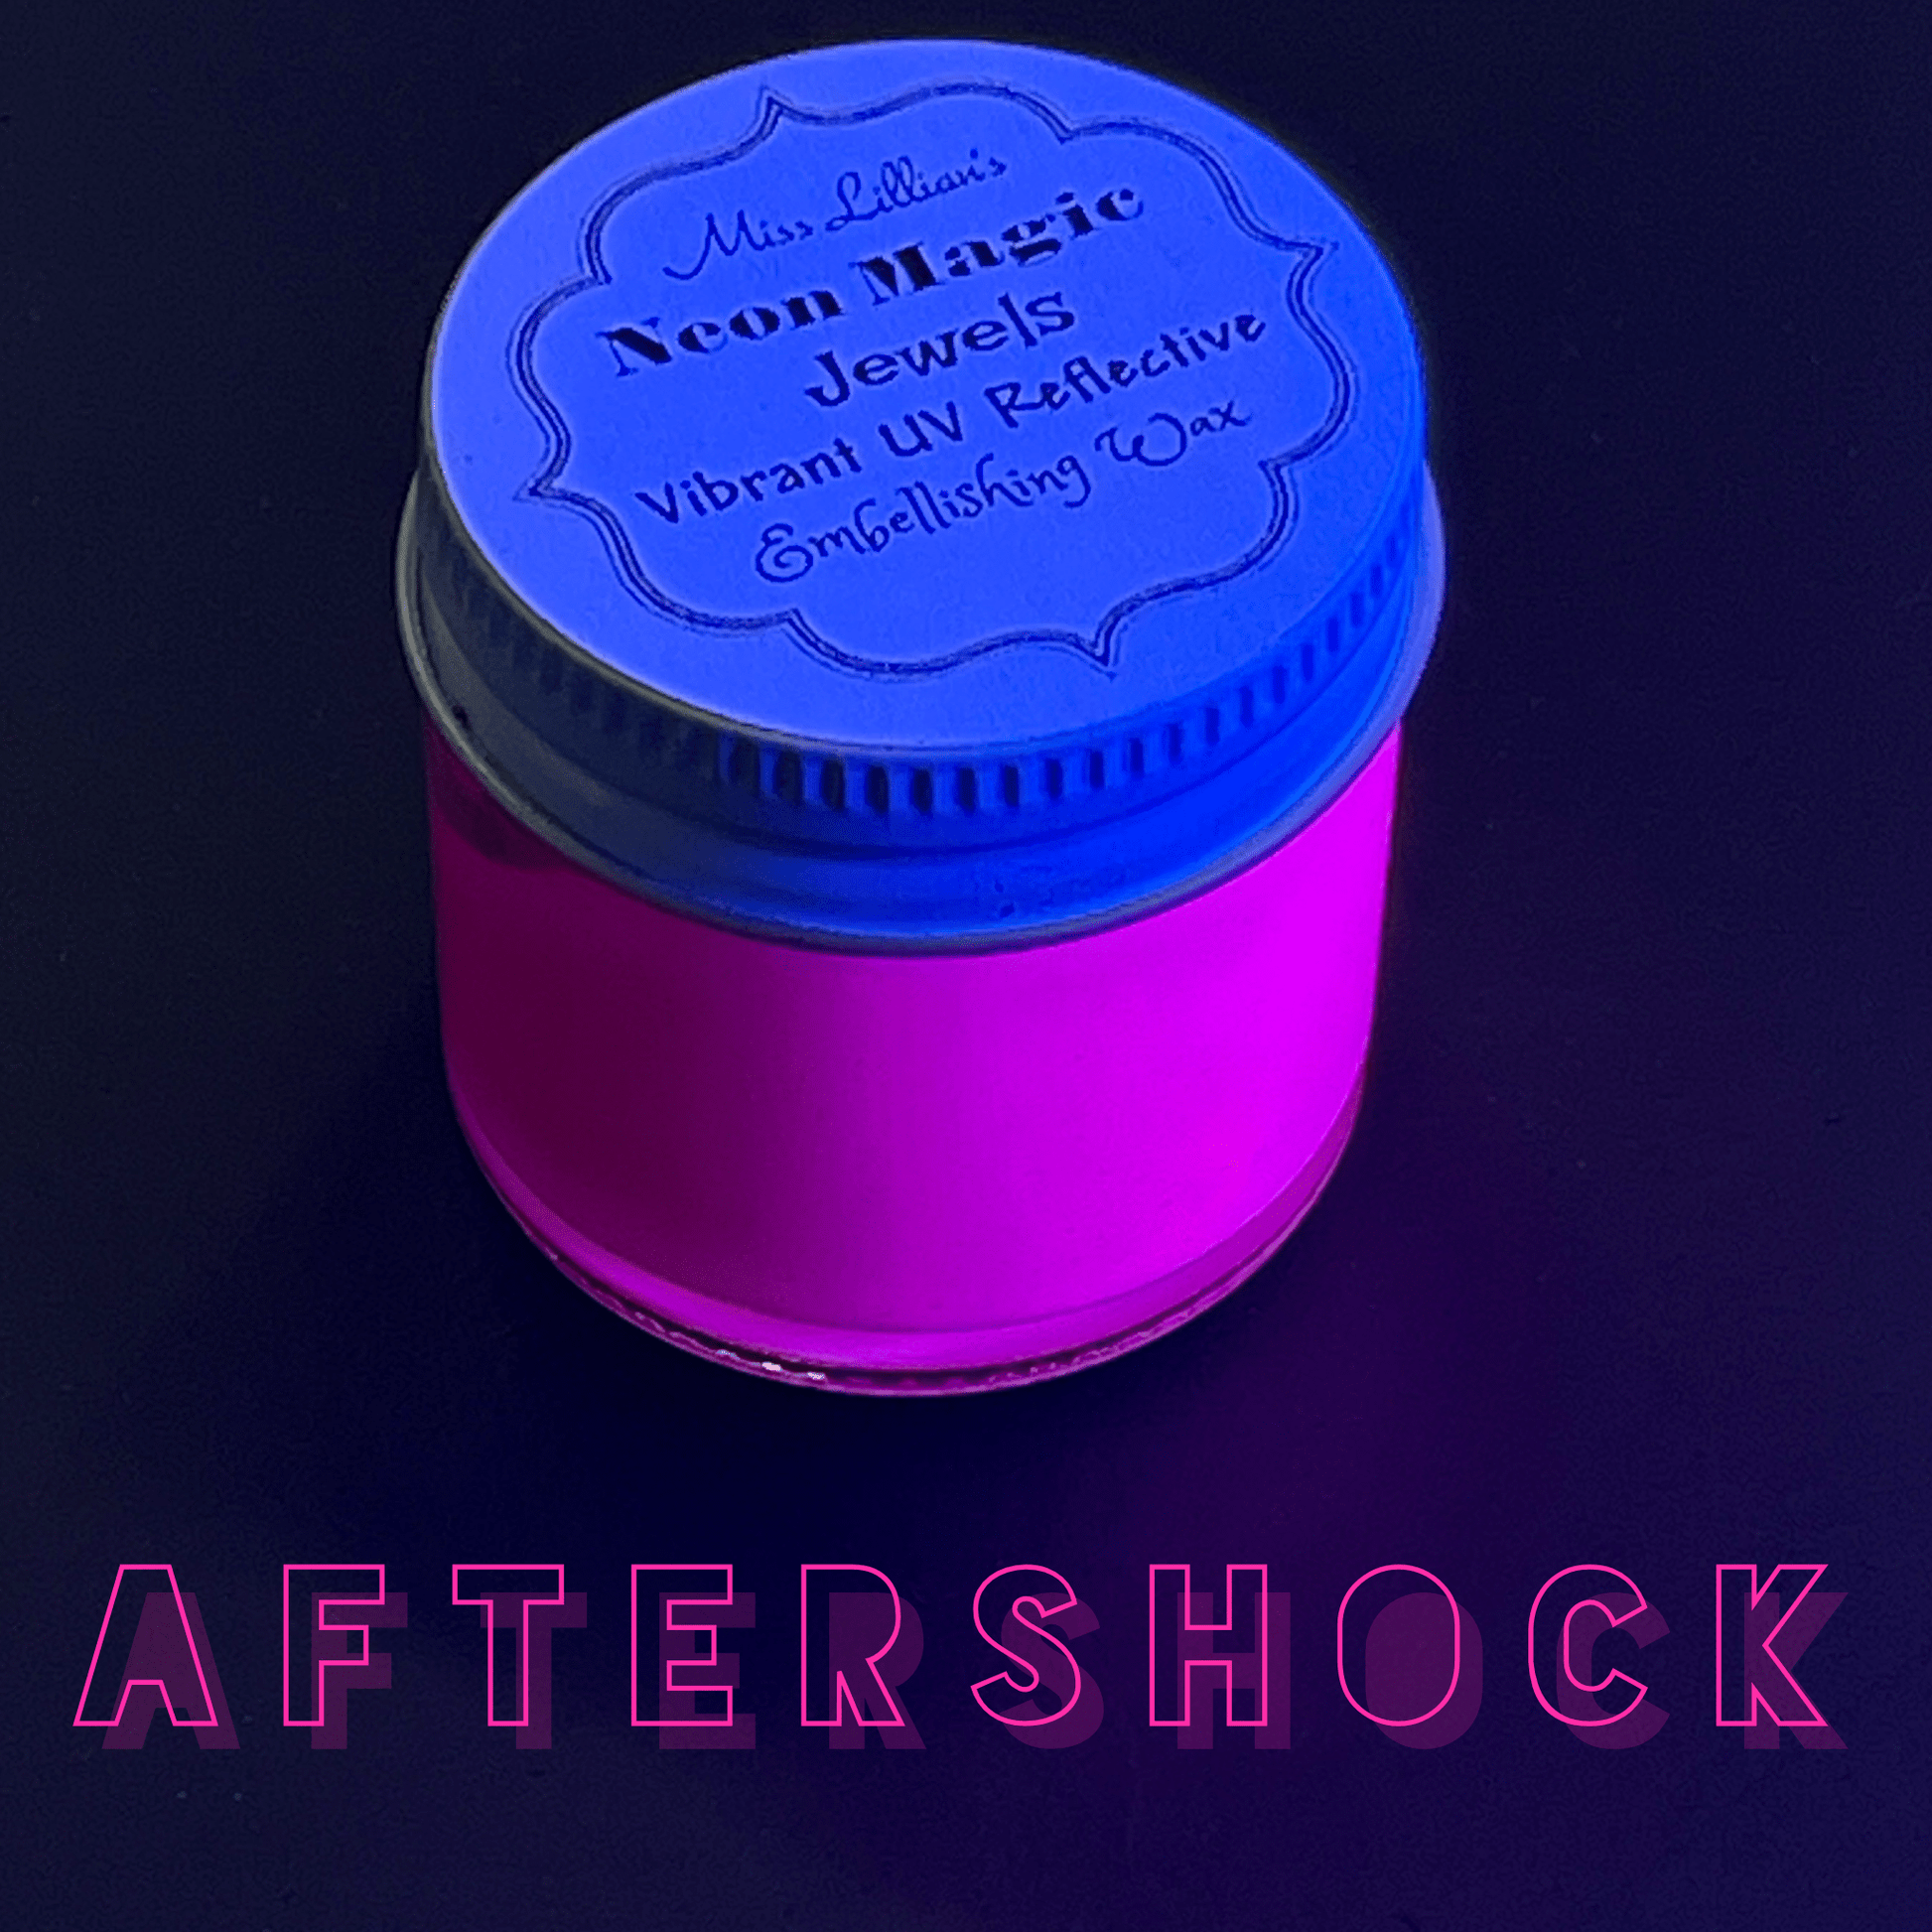 Miss Lillians Chock Paint Neon Waxes AFTERSHOCK-NEON Gilding Wax Jewels (Bright Pink)